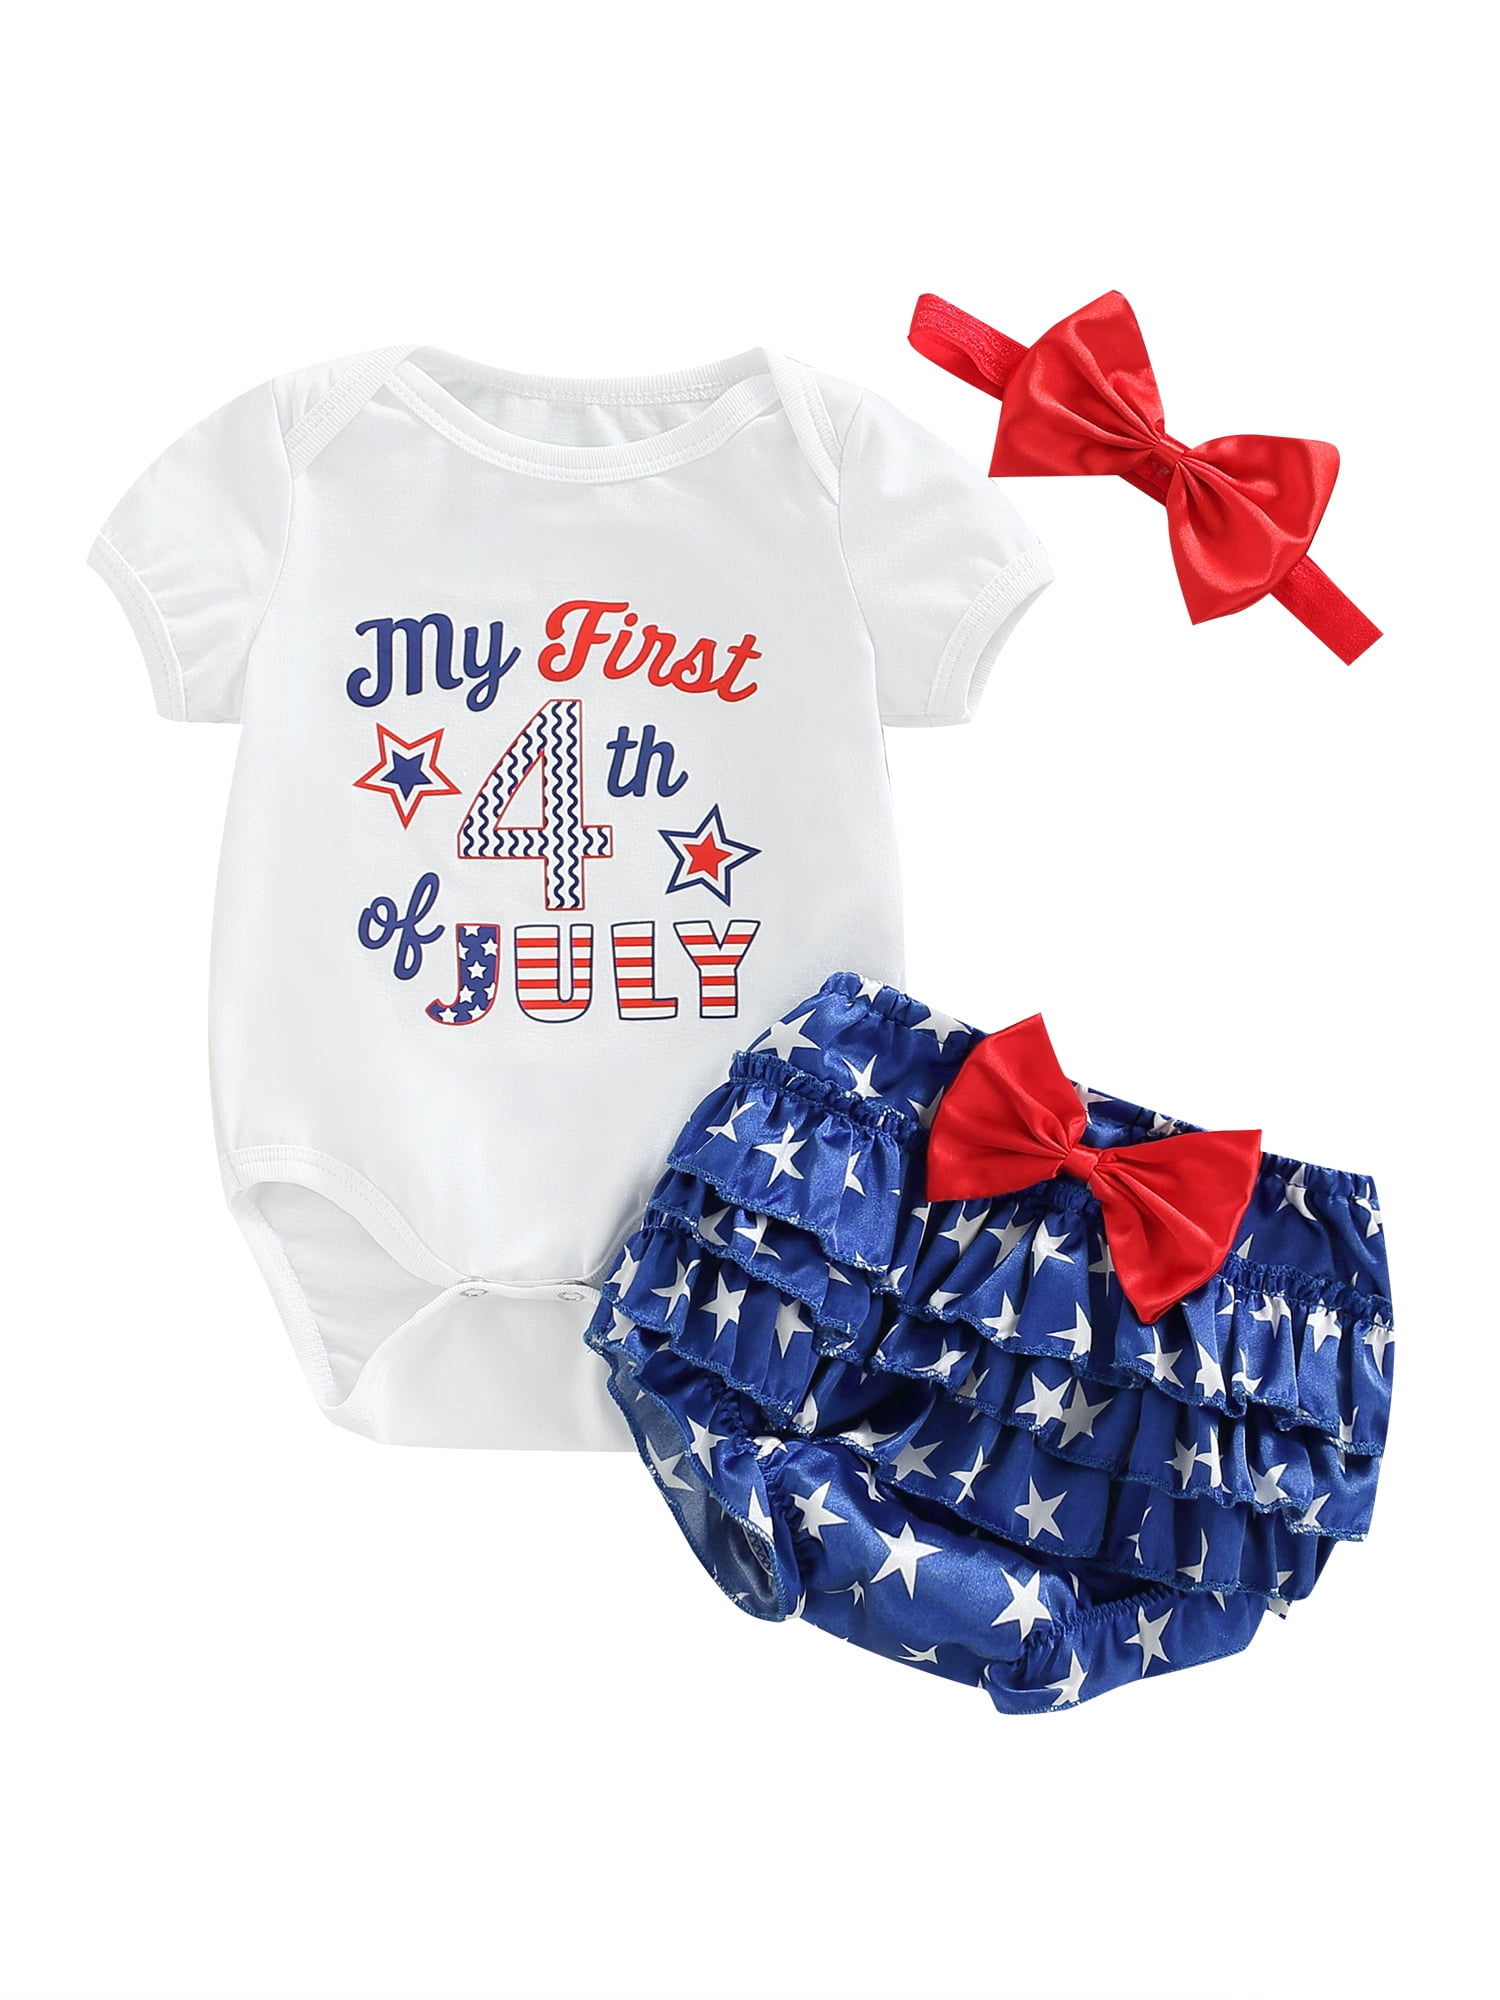 Infant Baby Girl Clothes Romper Floral Short Pants Headband Cute Newborn Girls’Summer Outfit Toddler Clothing Set 3pcs（0-24 Months） 